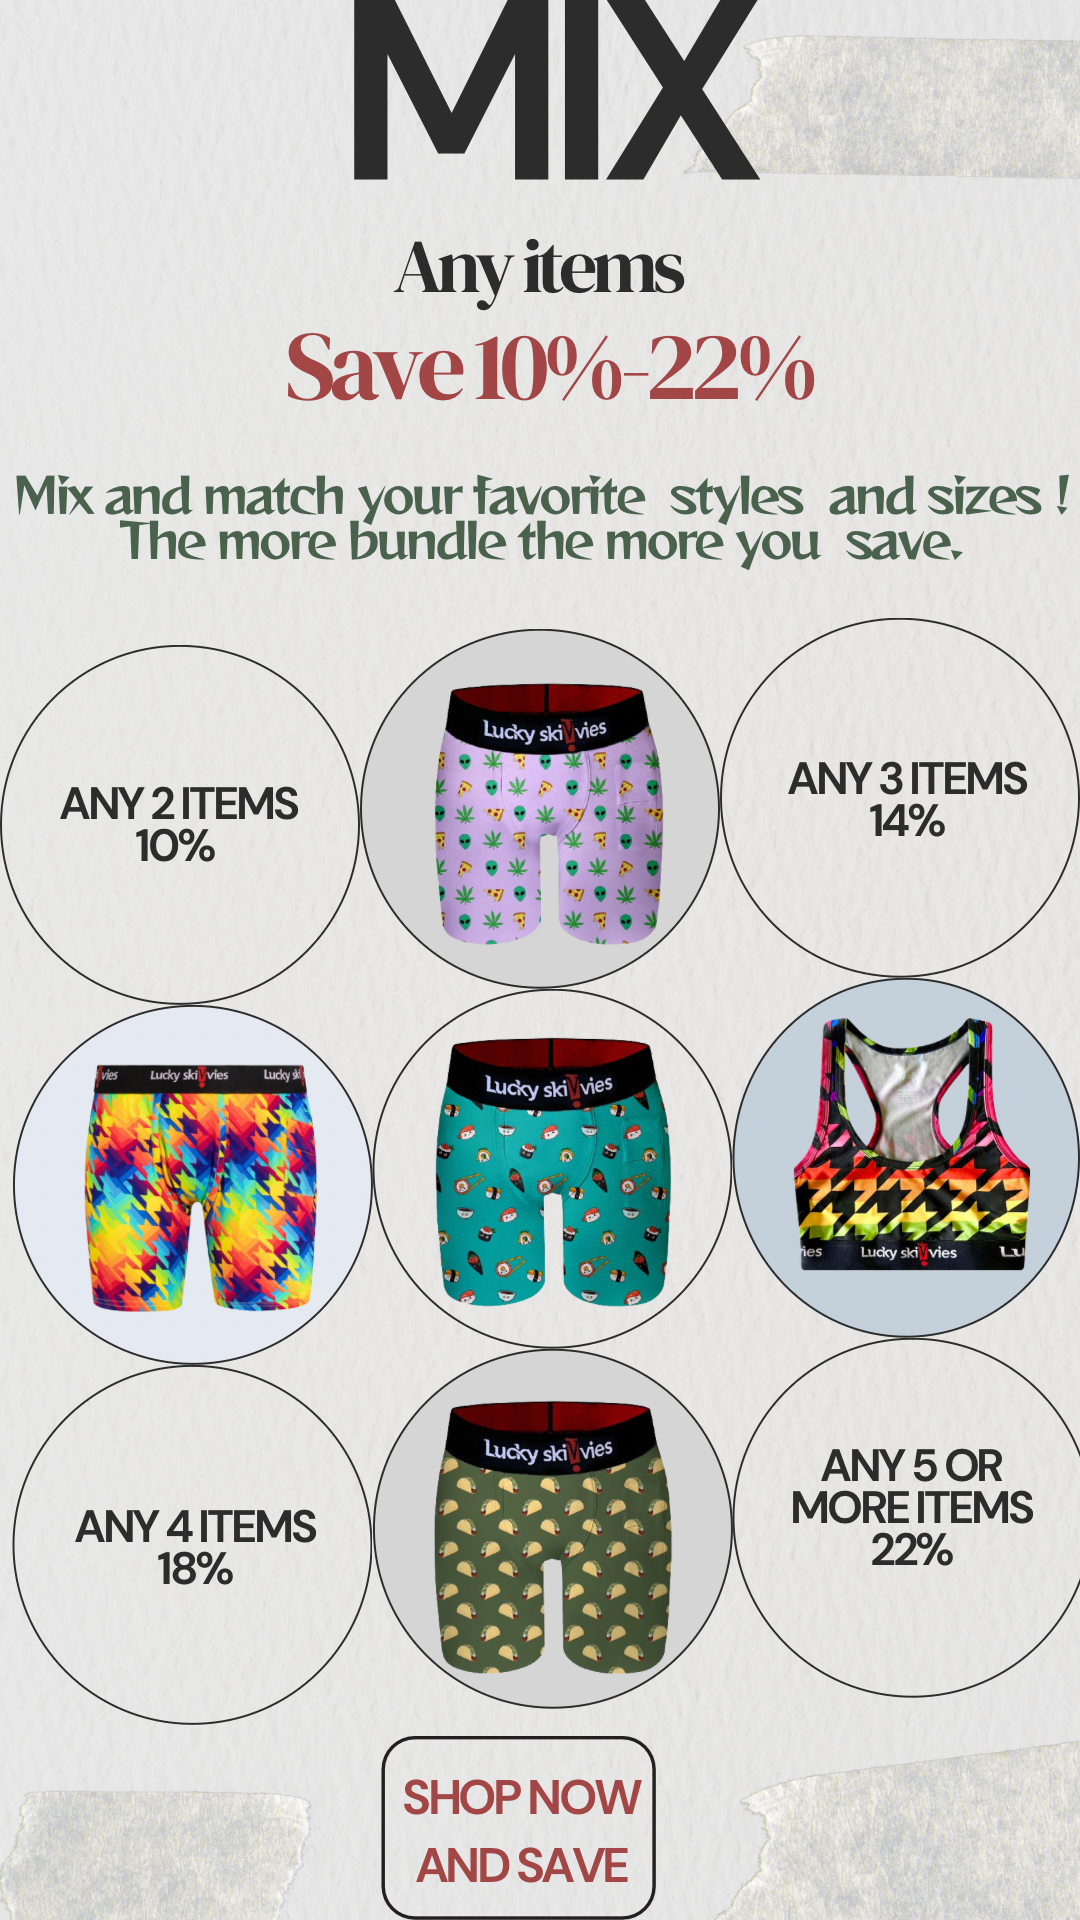 Get 10% to 22% off. Mix & match your selections. The more you bundle the more you save. - Lucky Skivvies